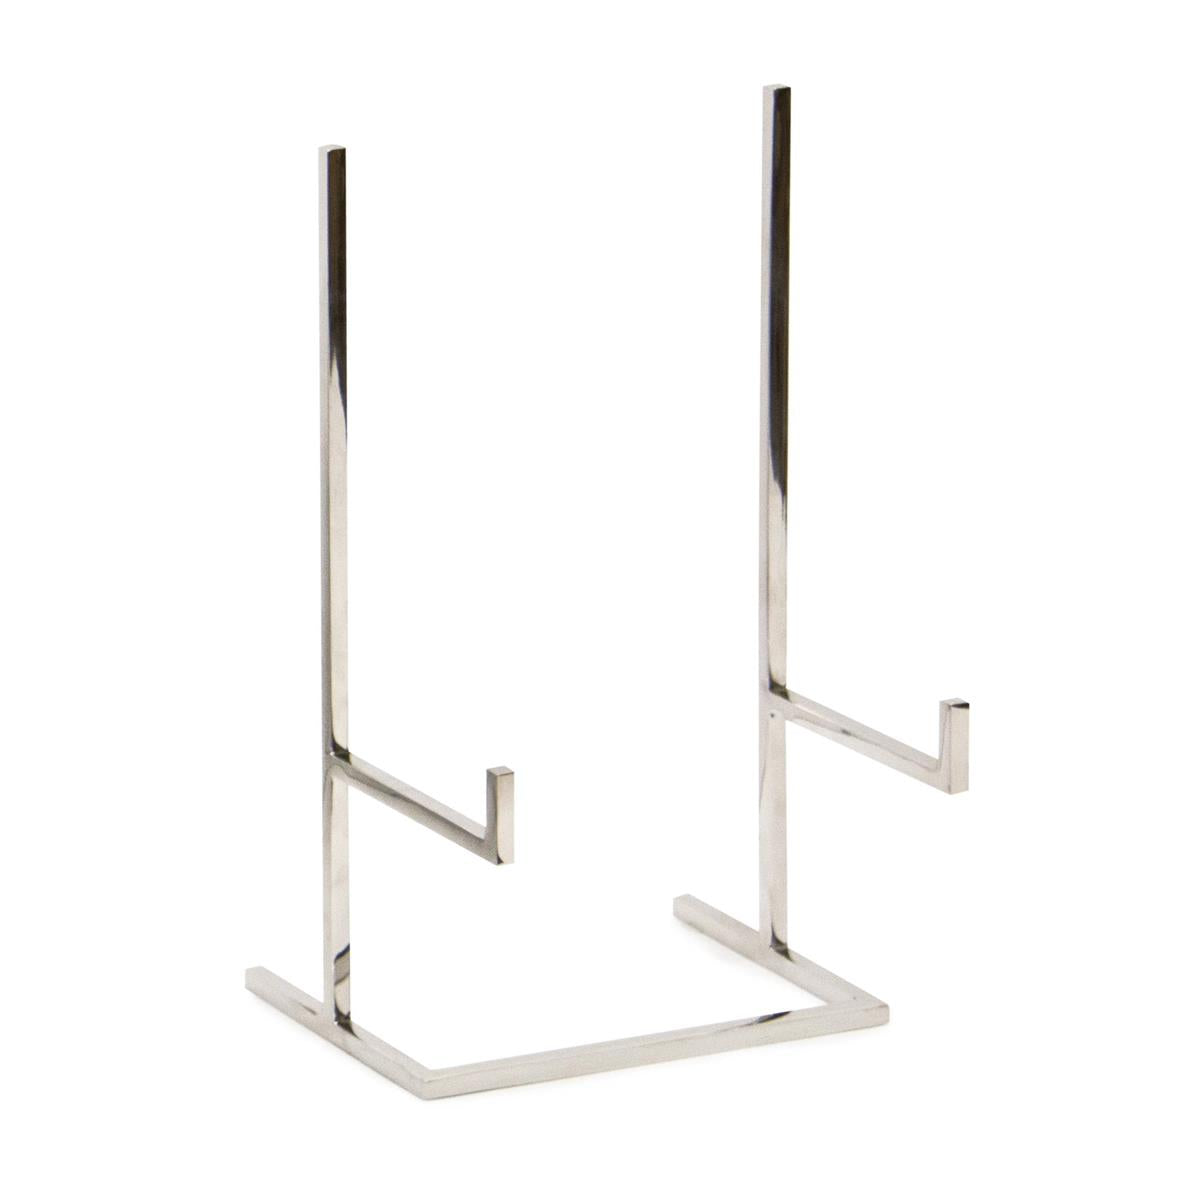 CHARGER STAND SILVER